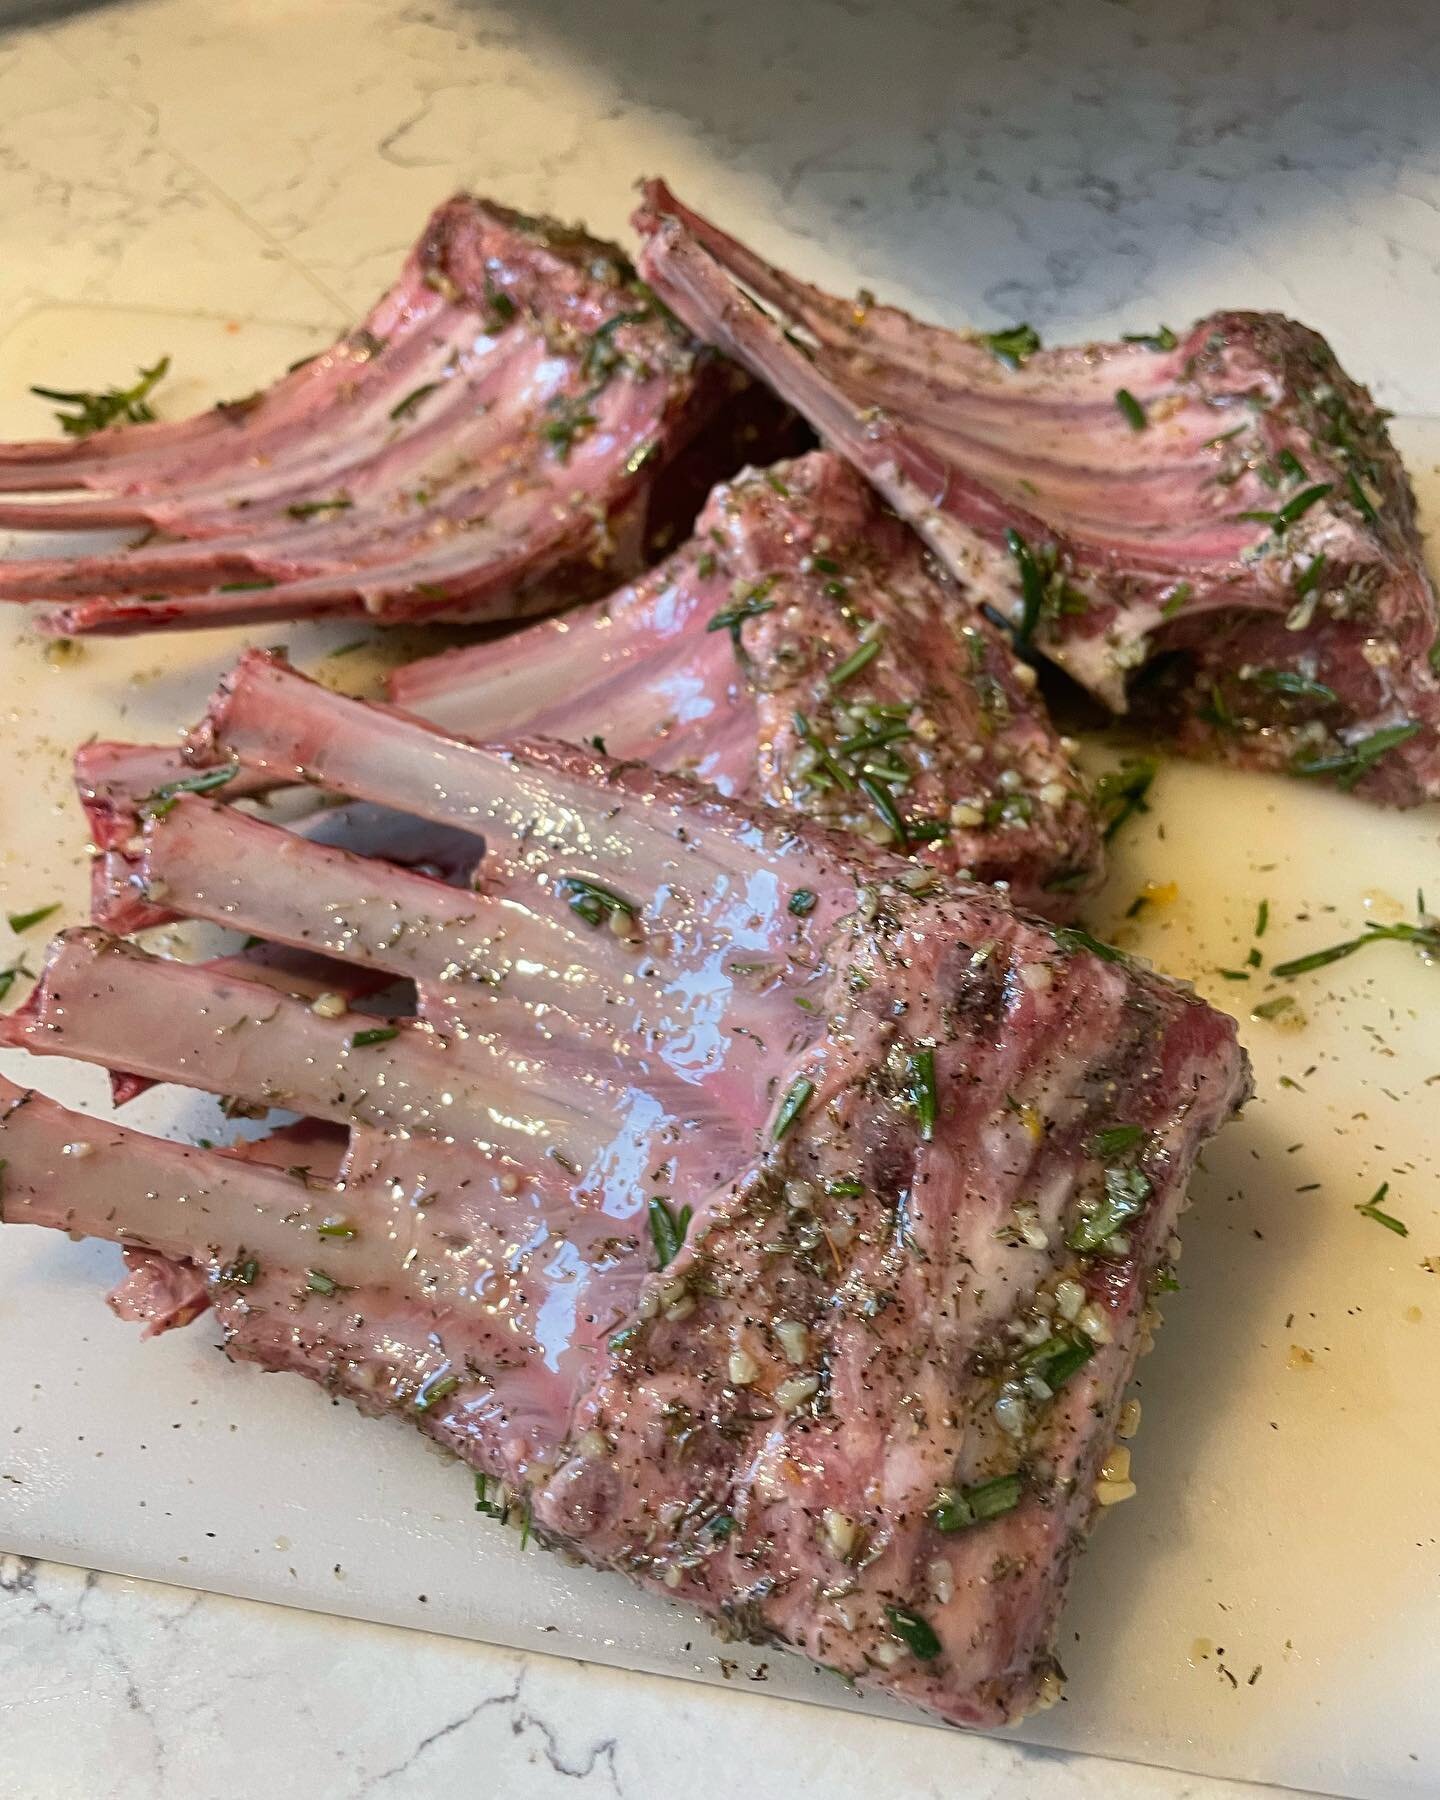 Spring menu highlight: Roasted Rack of Lamb with Garlic Fingerling Potatoes &amp; Asparagus. Had a wonderful time serving up some Sonoma seasonal bounty to three delightful couples visiting wine country from Georgia. 
.
#farmtotable #farmtofork #sono